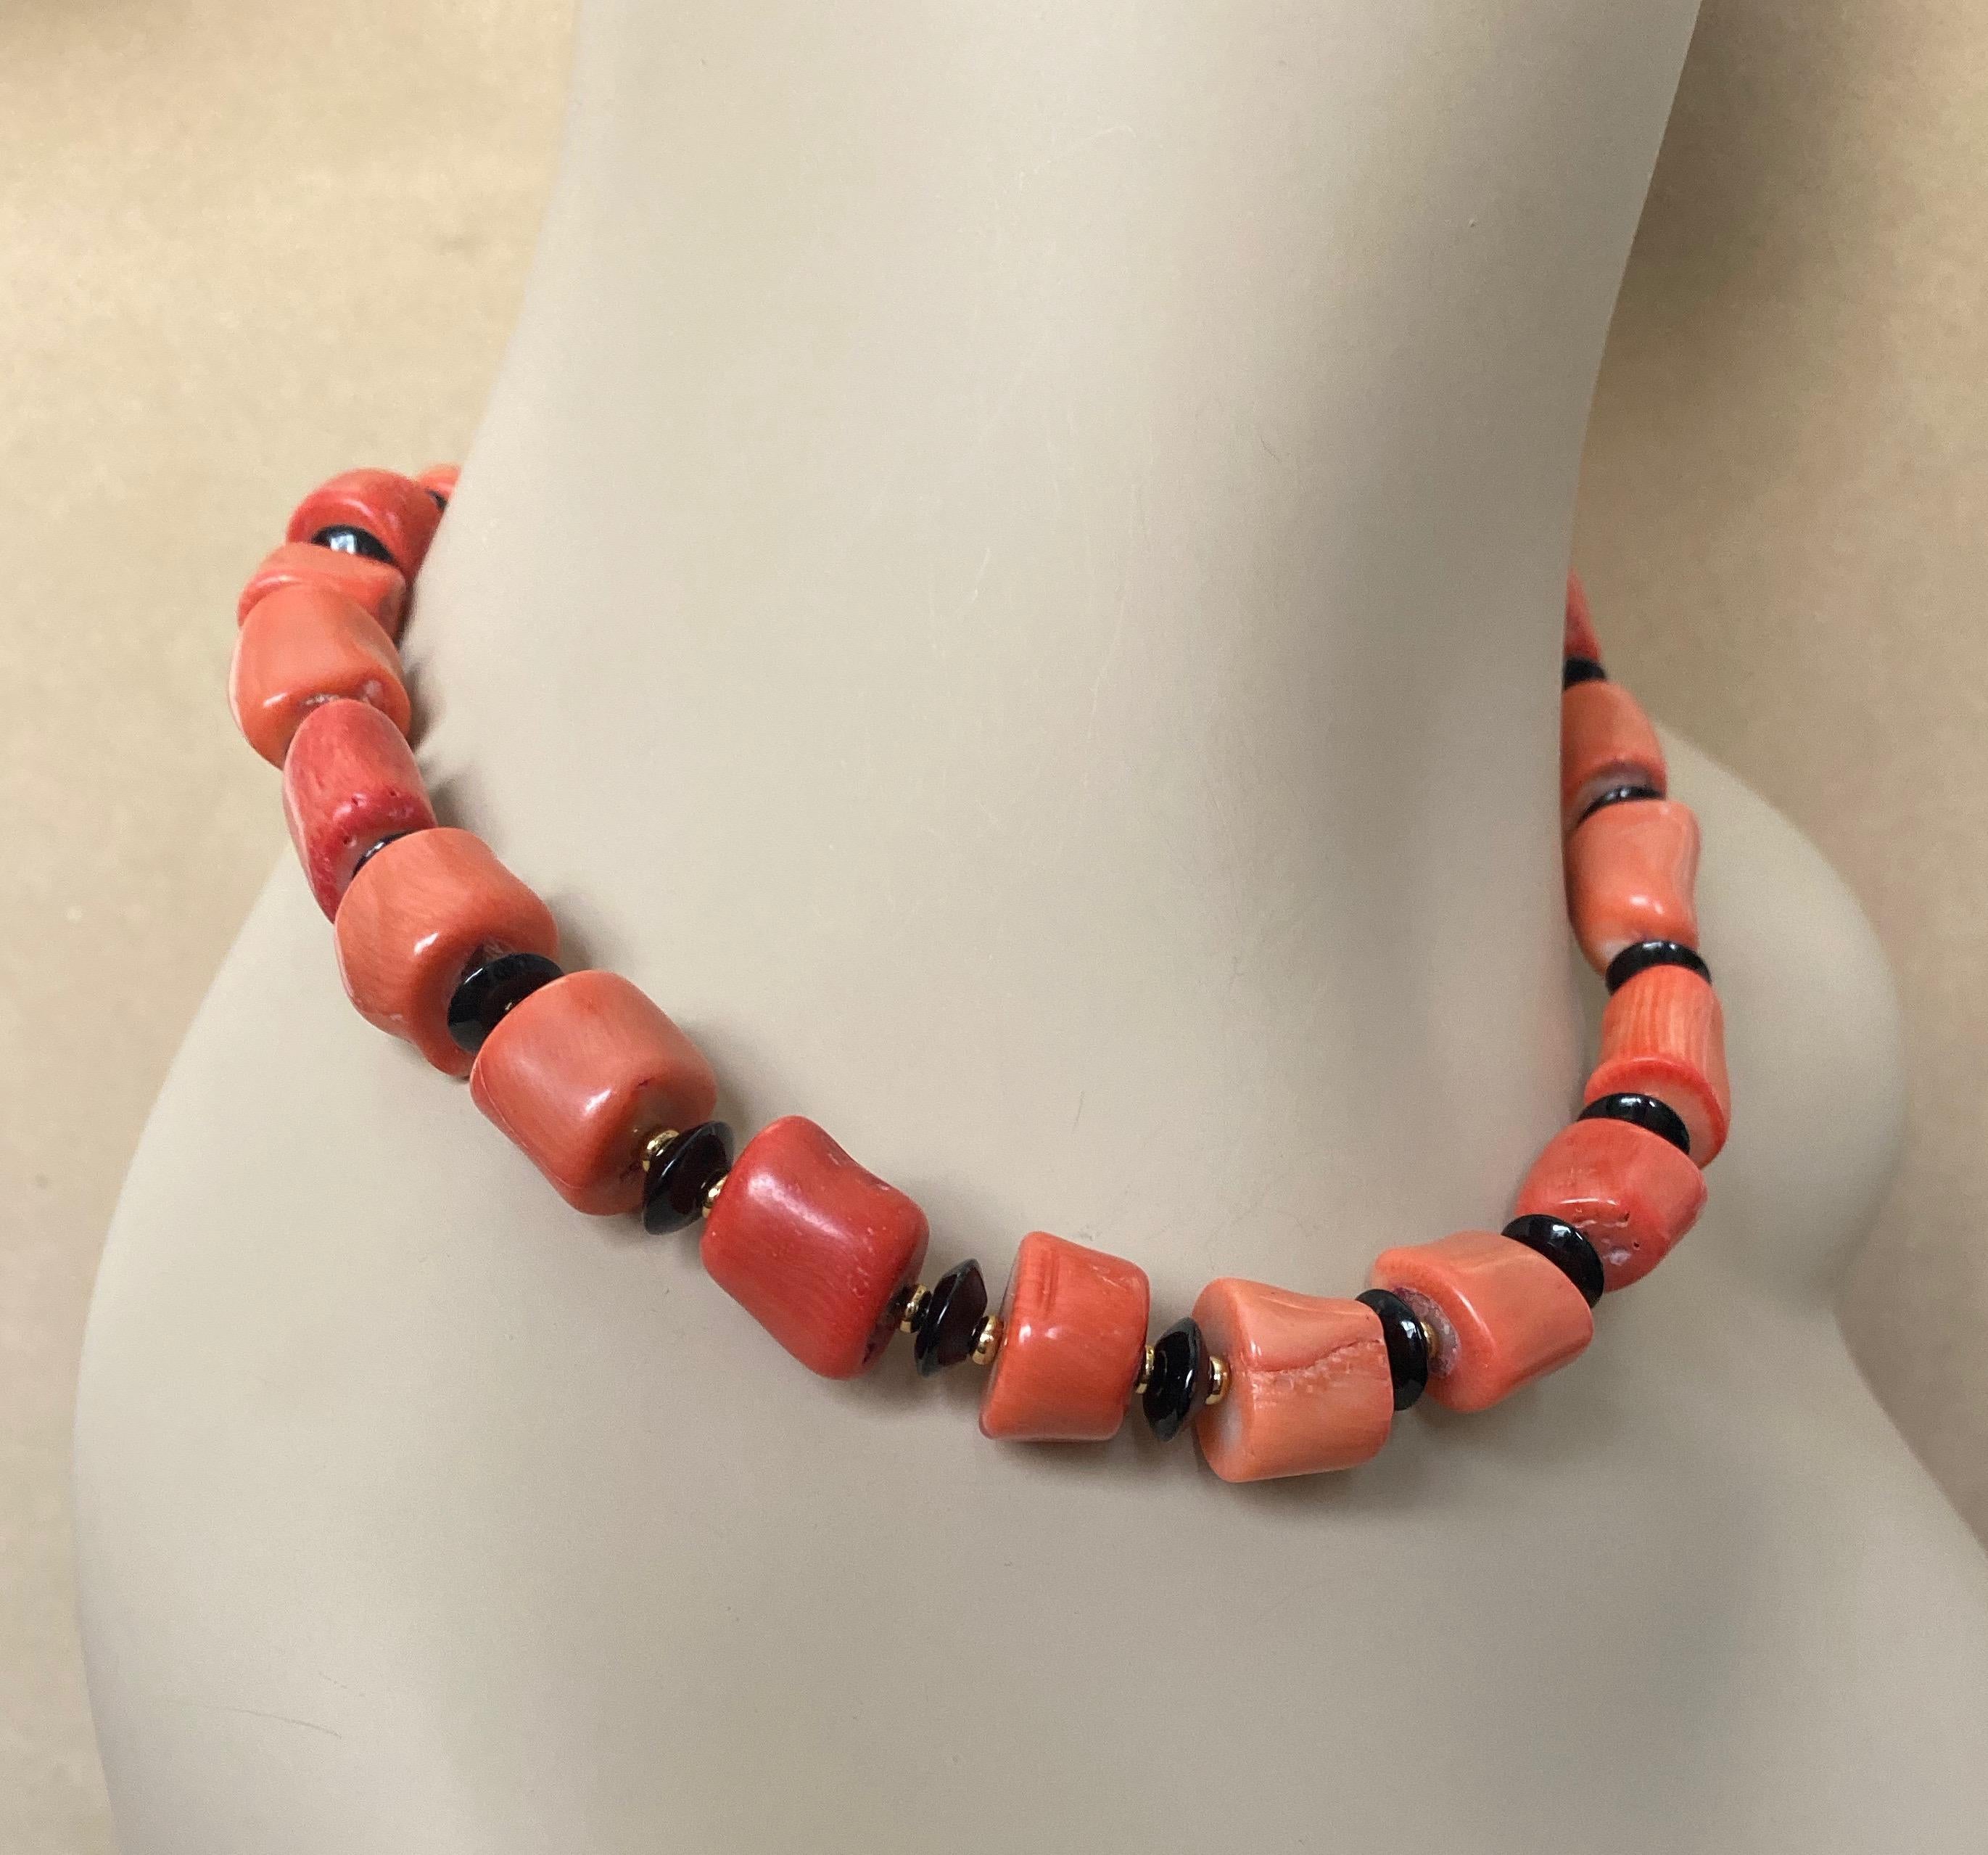 A huge branch of salmon colored coral has been sliced into nuggets to create the beads in this stylish necklace perfect this summer or for a tropical vacation.  The beads are highly polished and are irregular in shape-typical of branch coral.  The